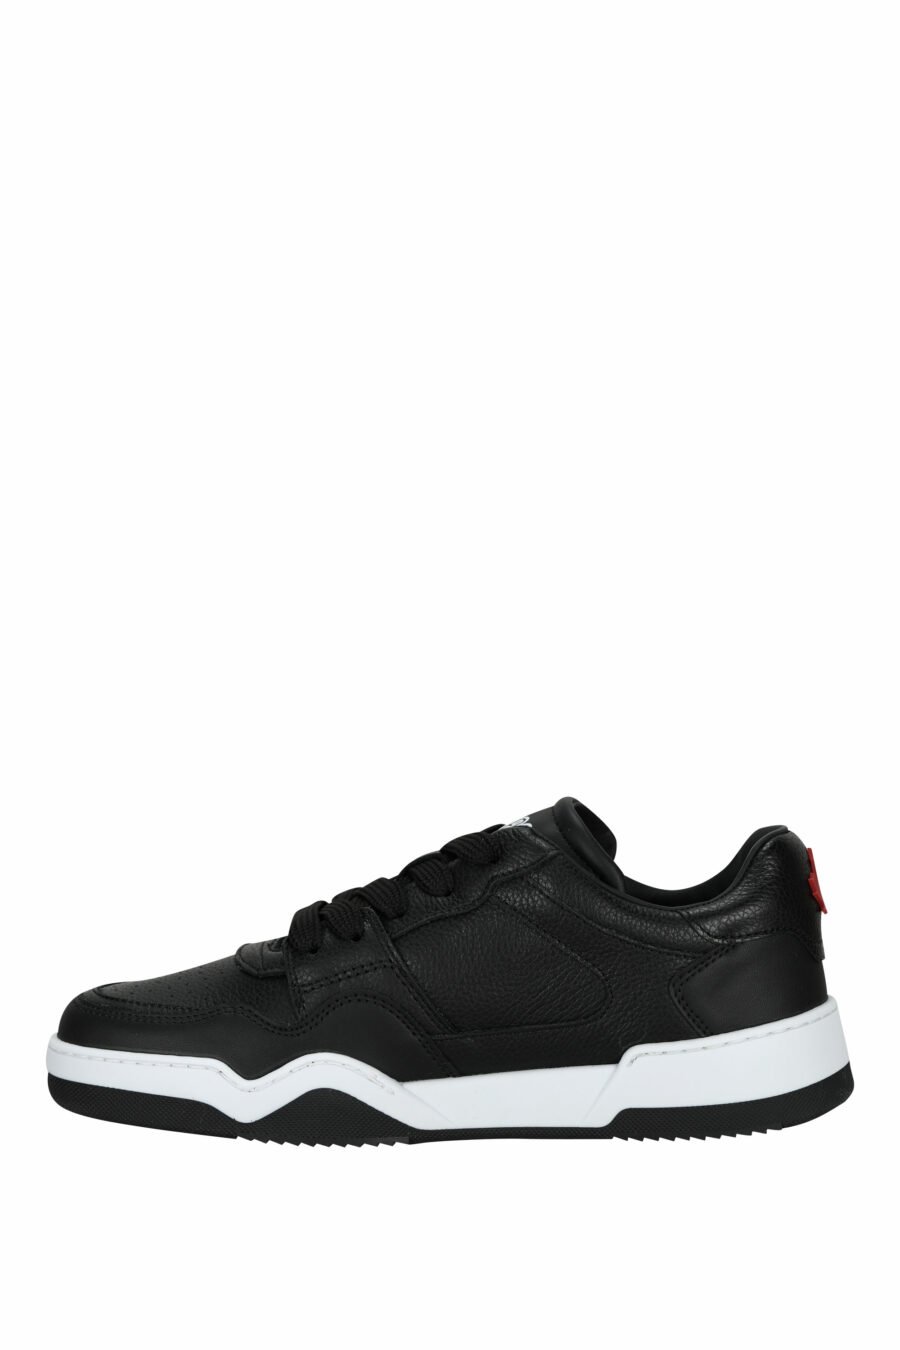 Black "spyker" trainers with two-tone sole - 8055777320327 2